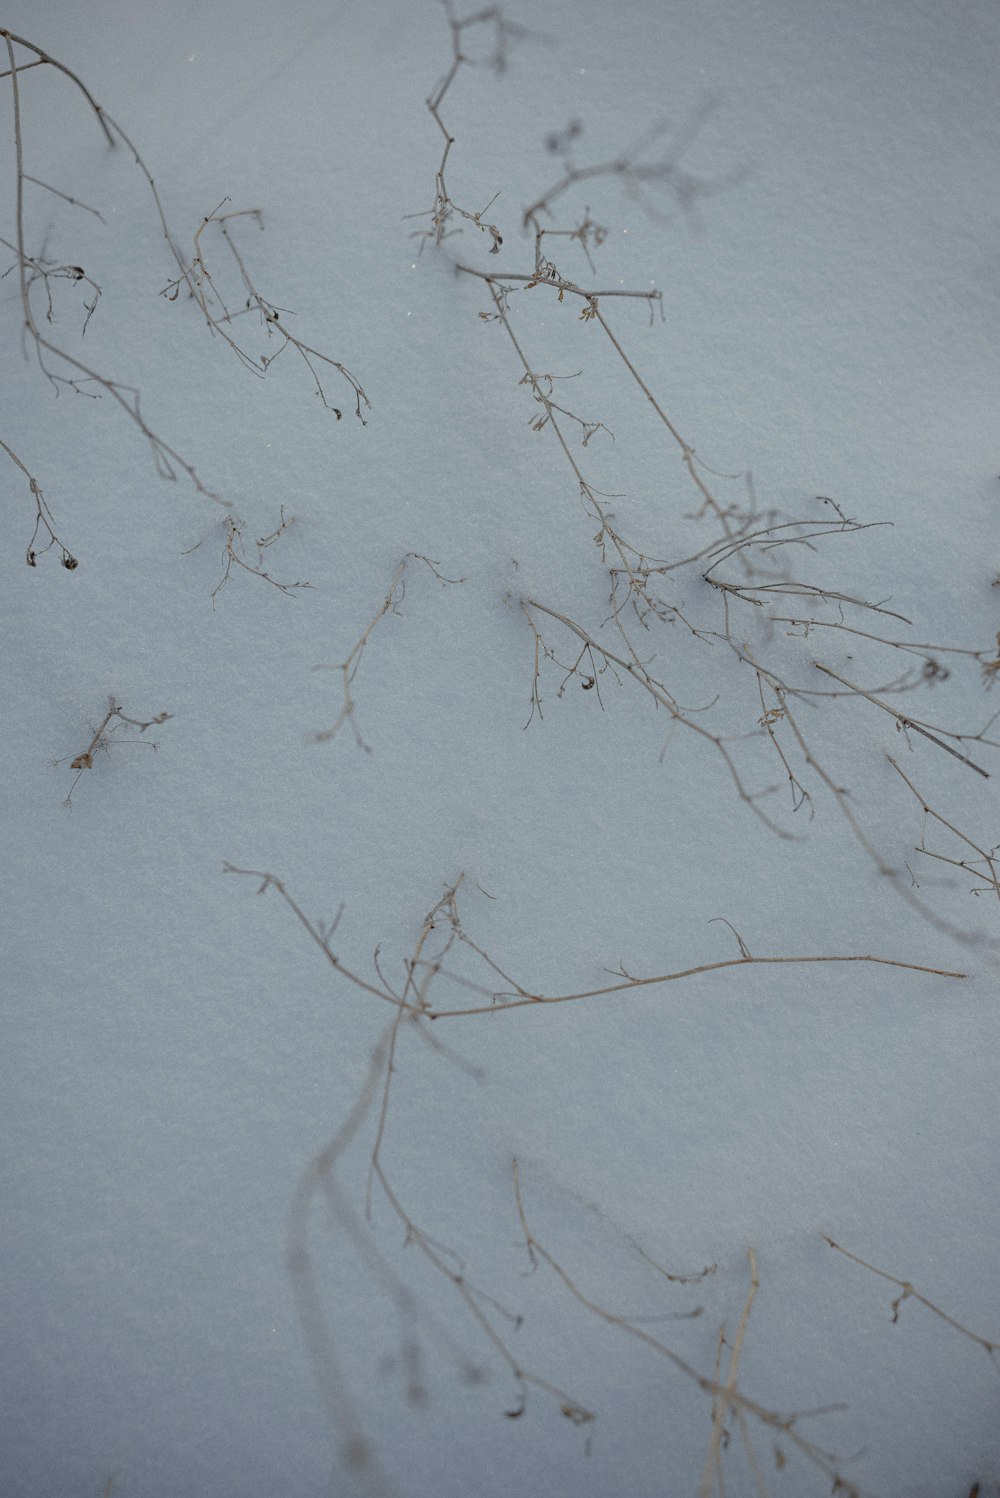 a bird is standing in the snow next to a branch